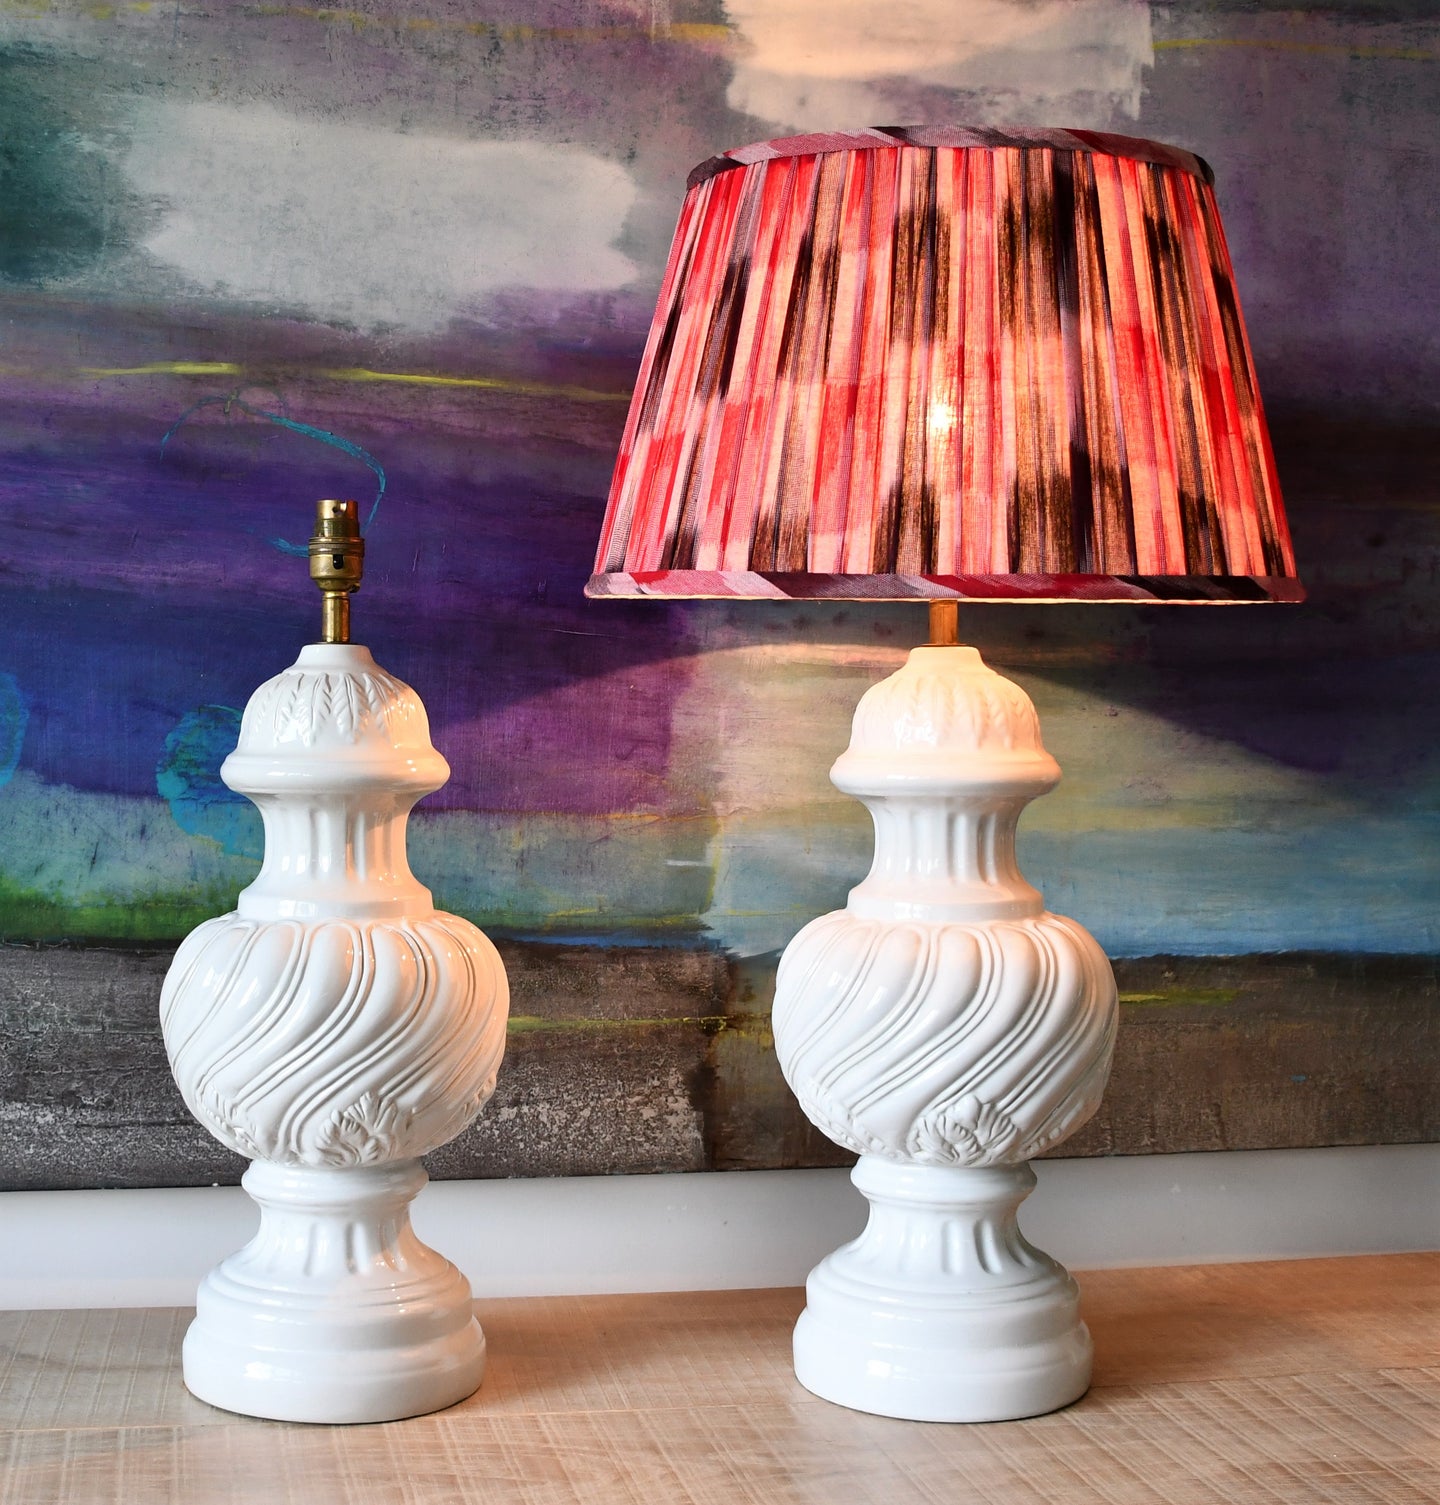 A Pair of Mid C Royal Doulton - Table Lamps